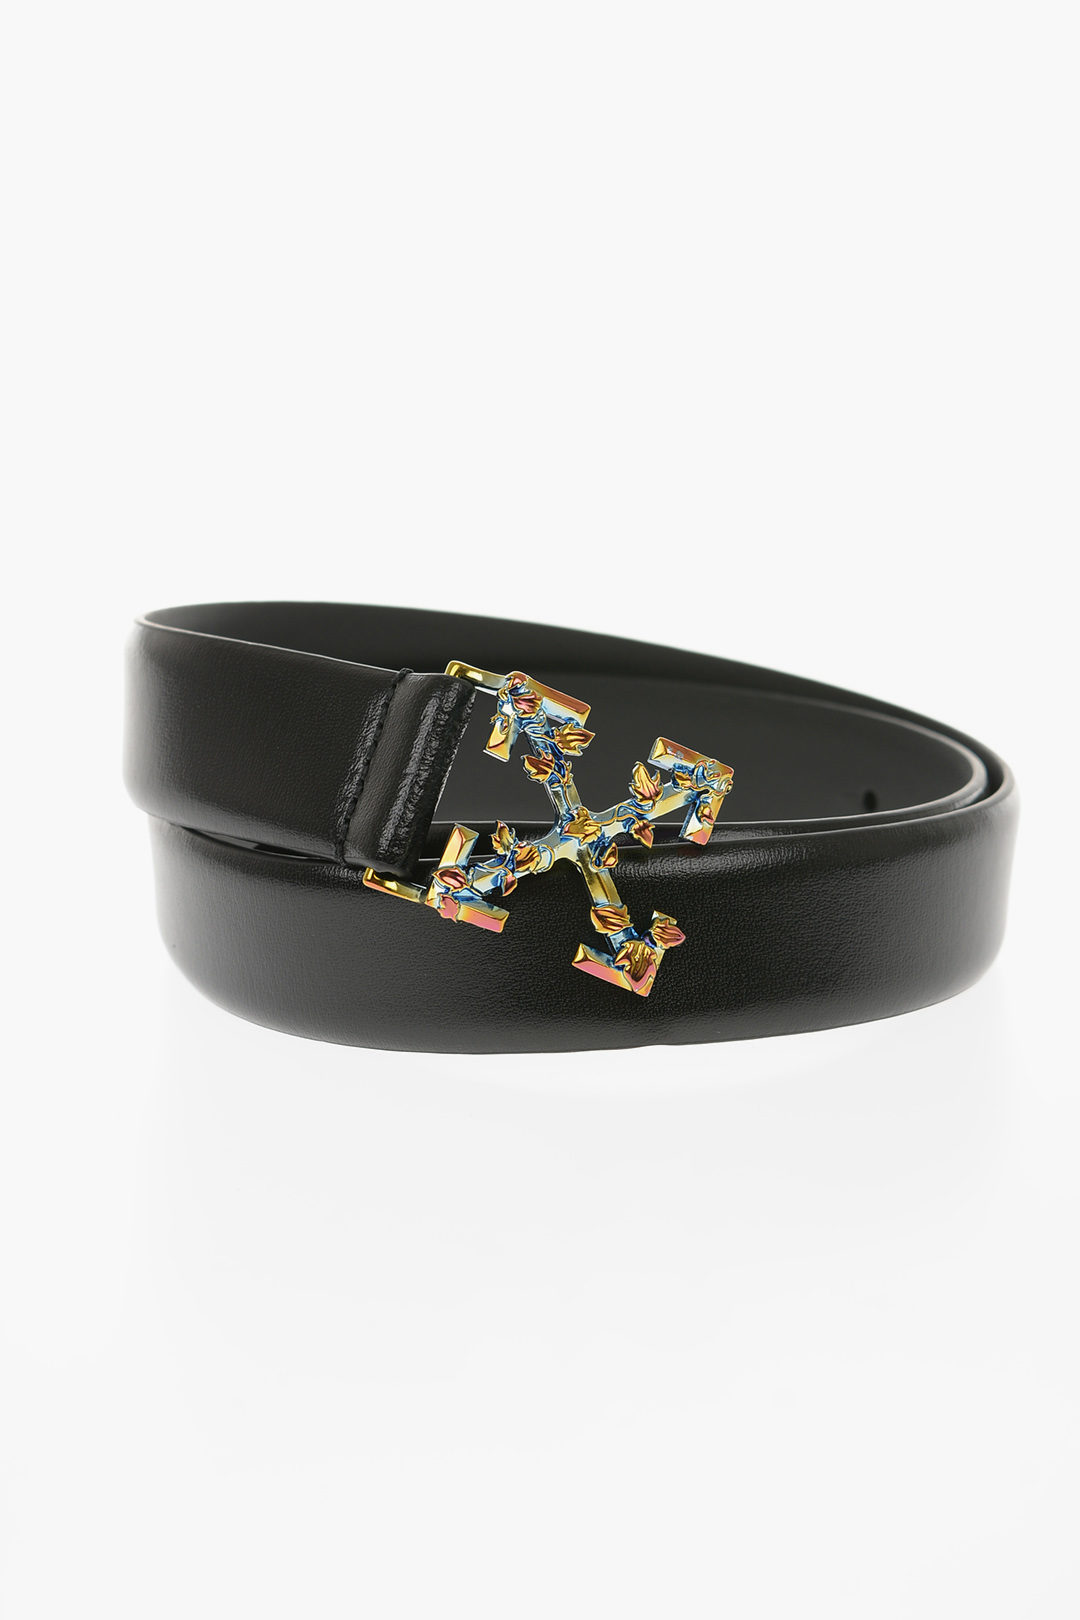 OFF WHITE CLASSIC ARROW BUCKLE LEATHER BELT BLUE SIZE 95/38 Us Brand New  for Sale in Queens, NY - OfferUp